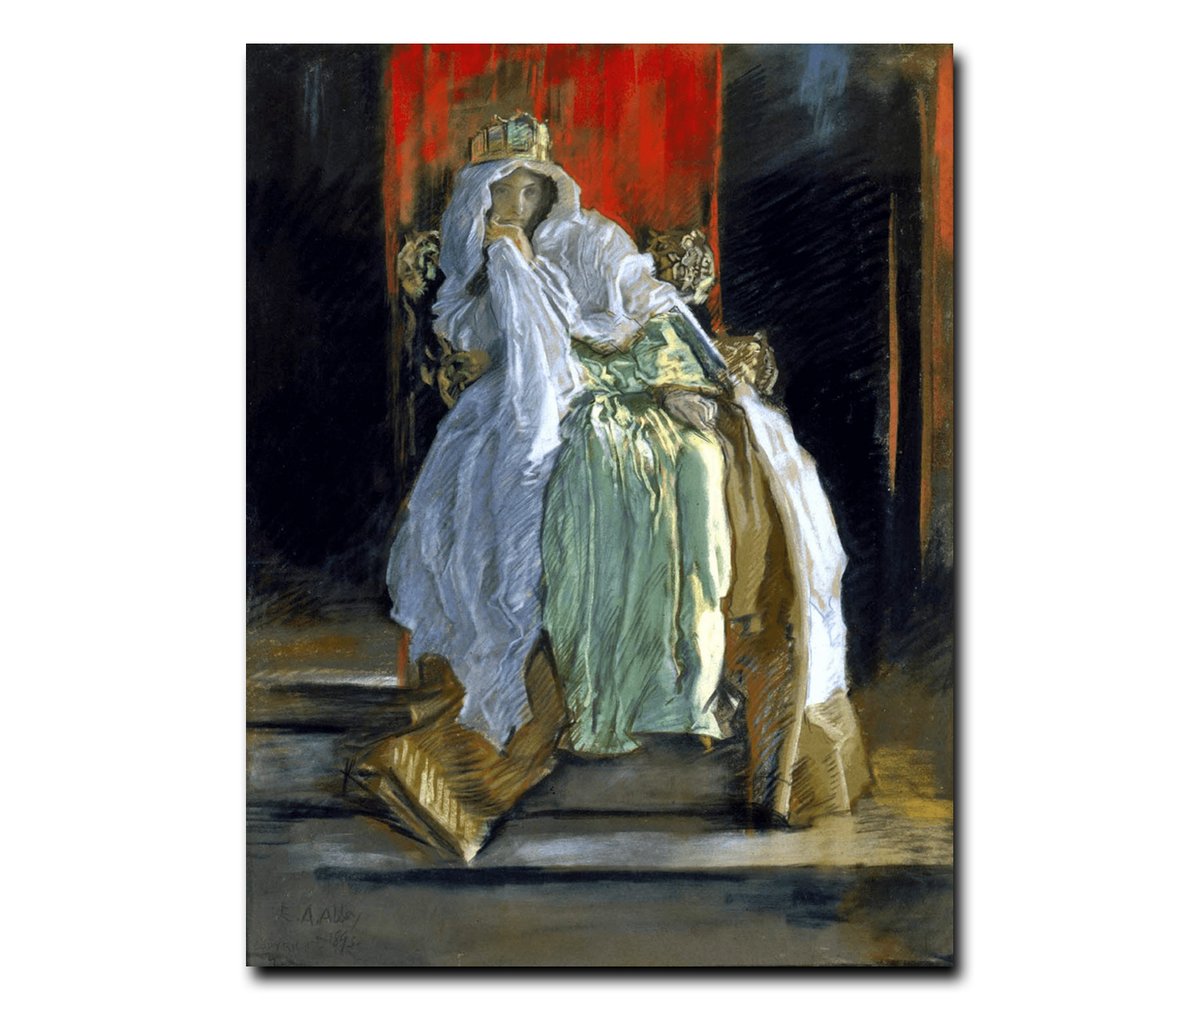 Art Inspiration For Today: The Queen in Hamlet by Edwin Austin Abbey (American), pastel on paperboard, genre: Victorian Art, Illustration, 1895 #thequeeninhamlet #edwinaustinabbey #americanart #victorianart #shakespeare #pohoartist #pastelart #artonx